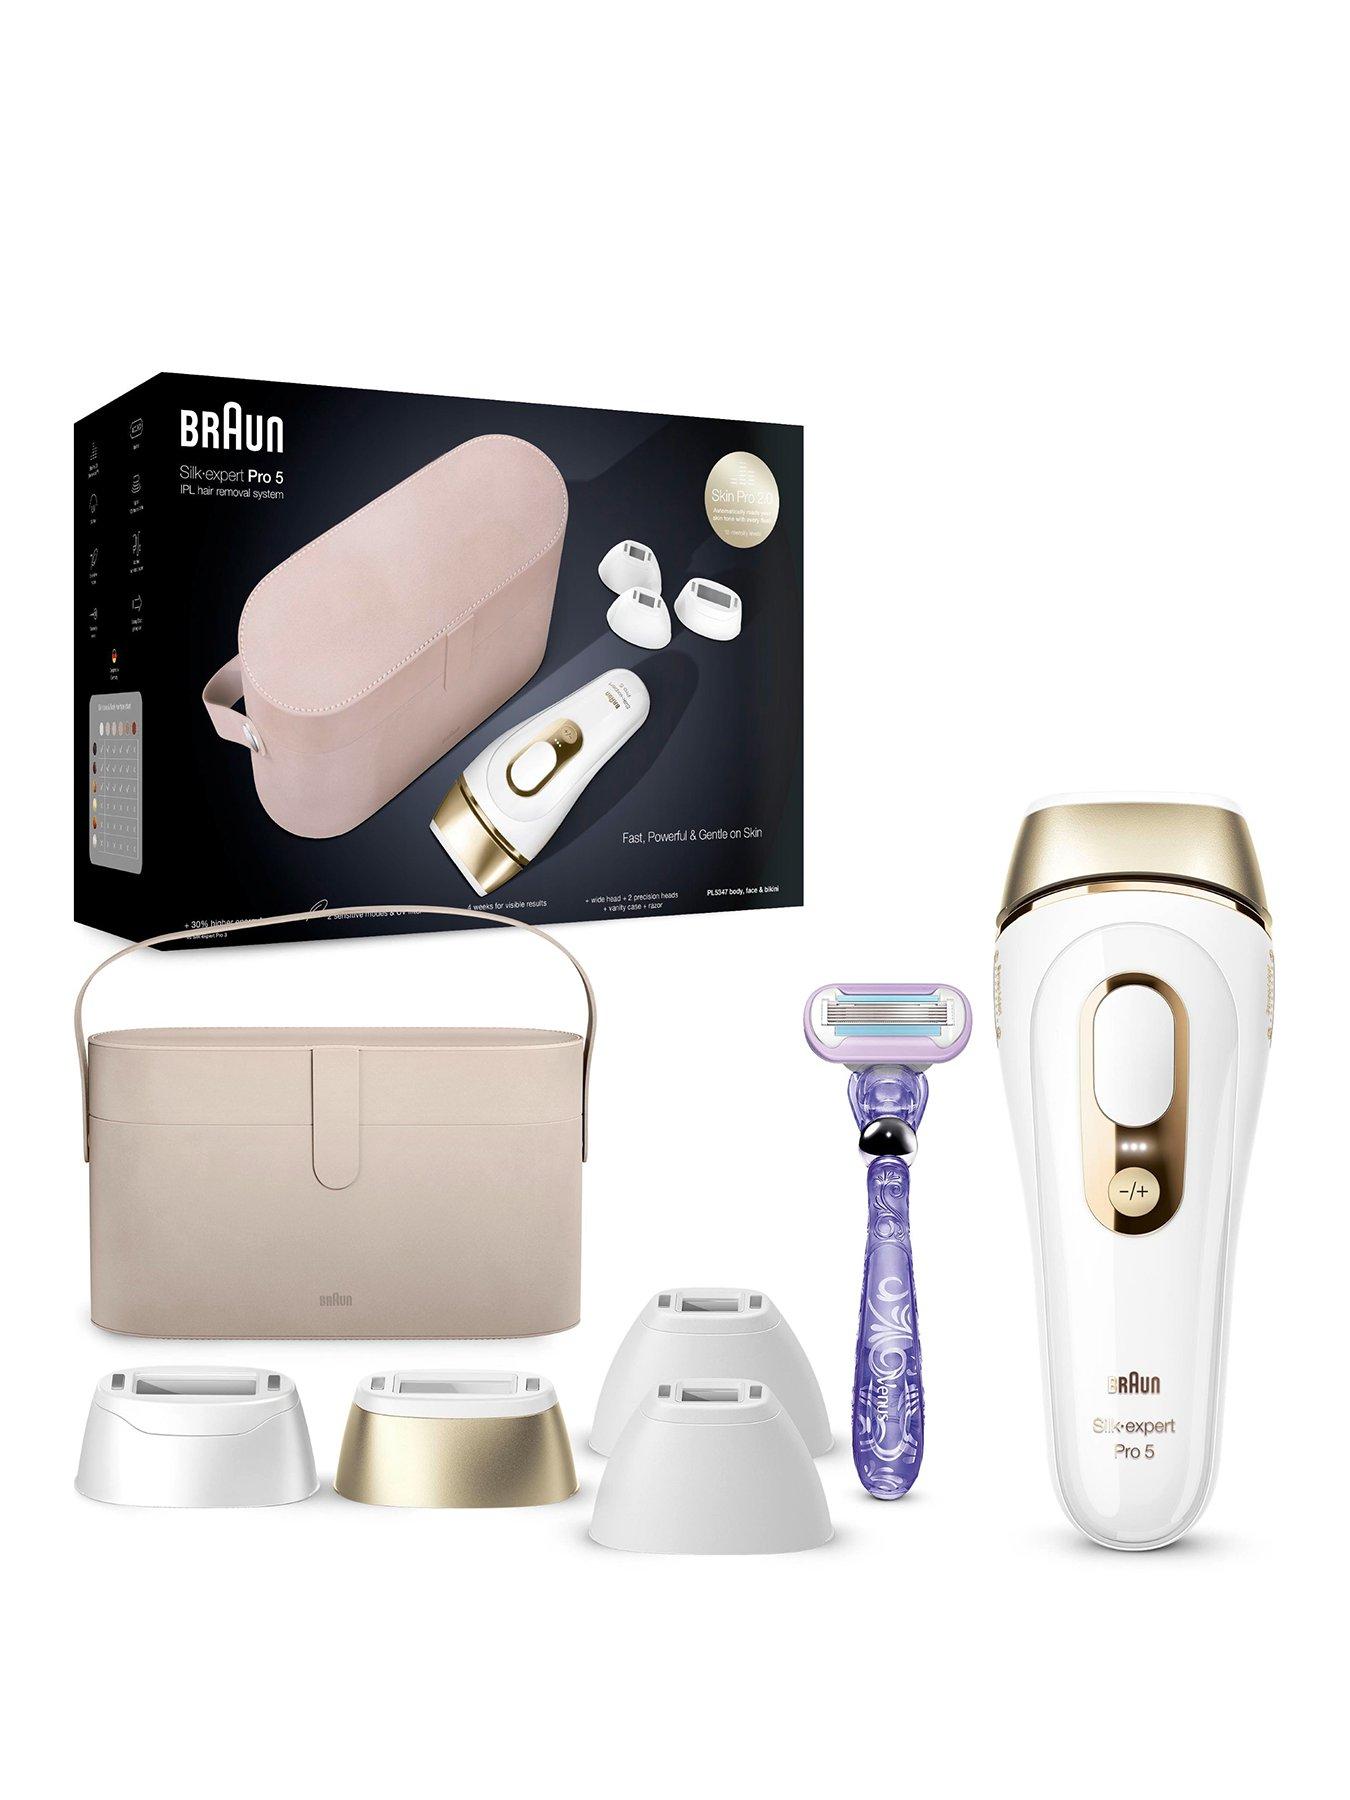 Braun IPL Silk·expert Pro 5 PL5223 Permanent Hair Removal Device for Body &  Face